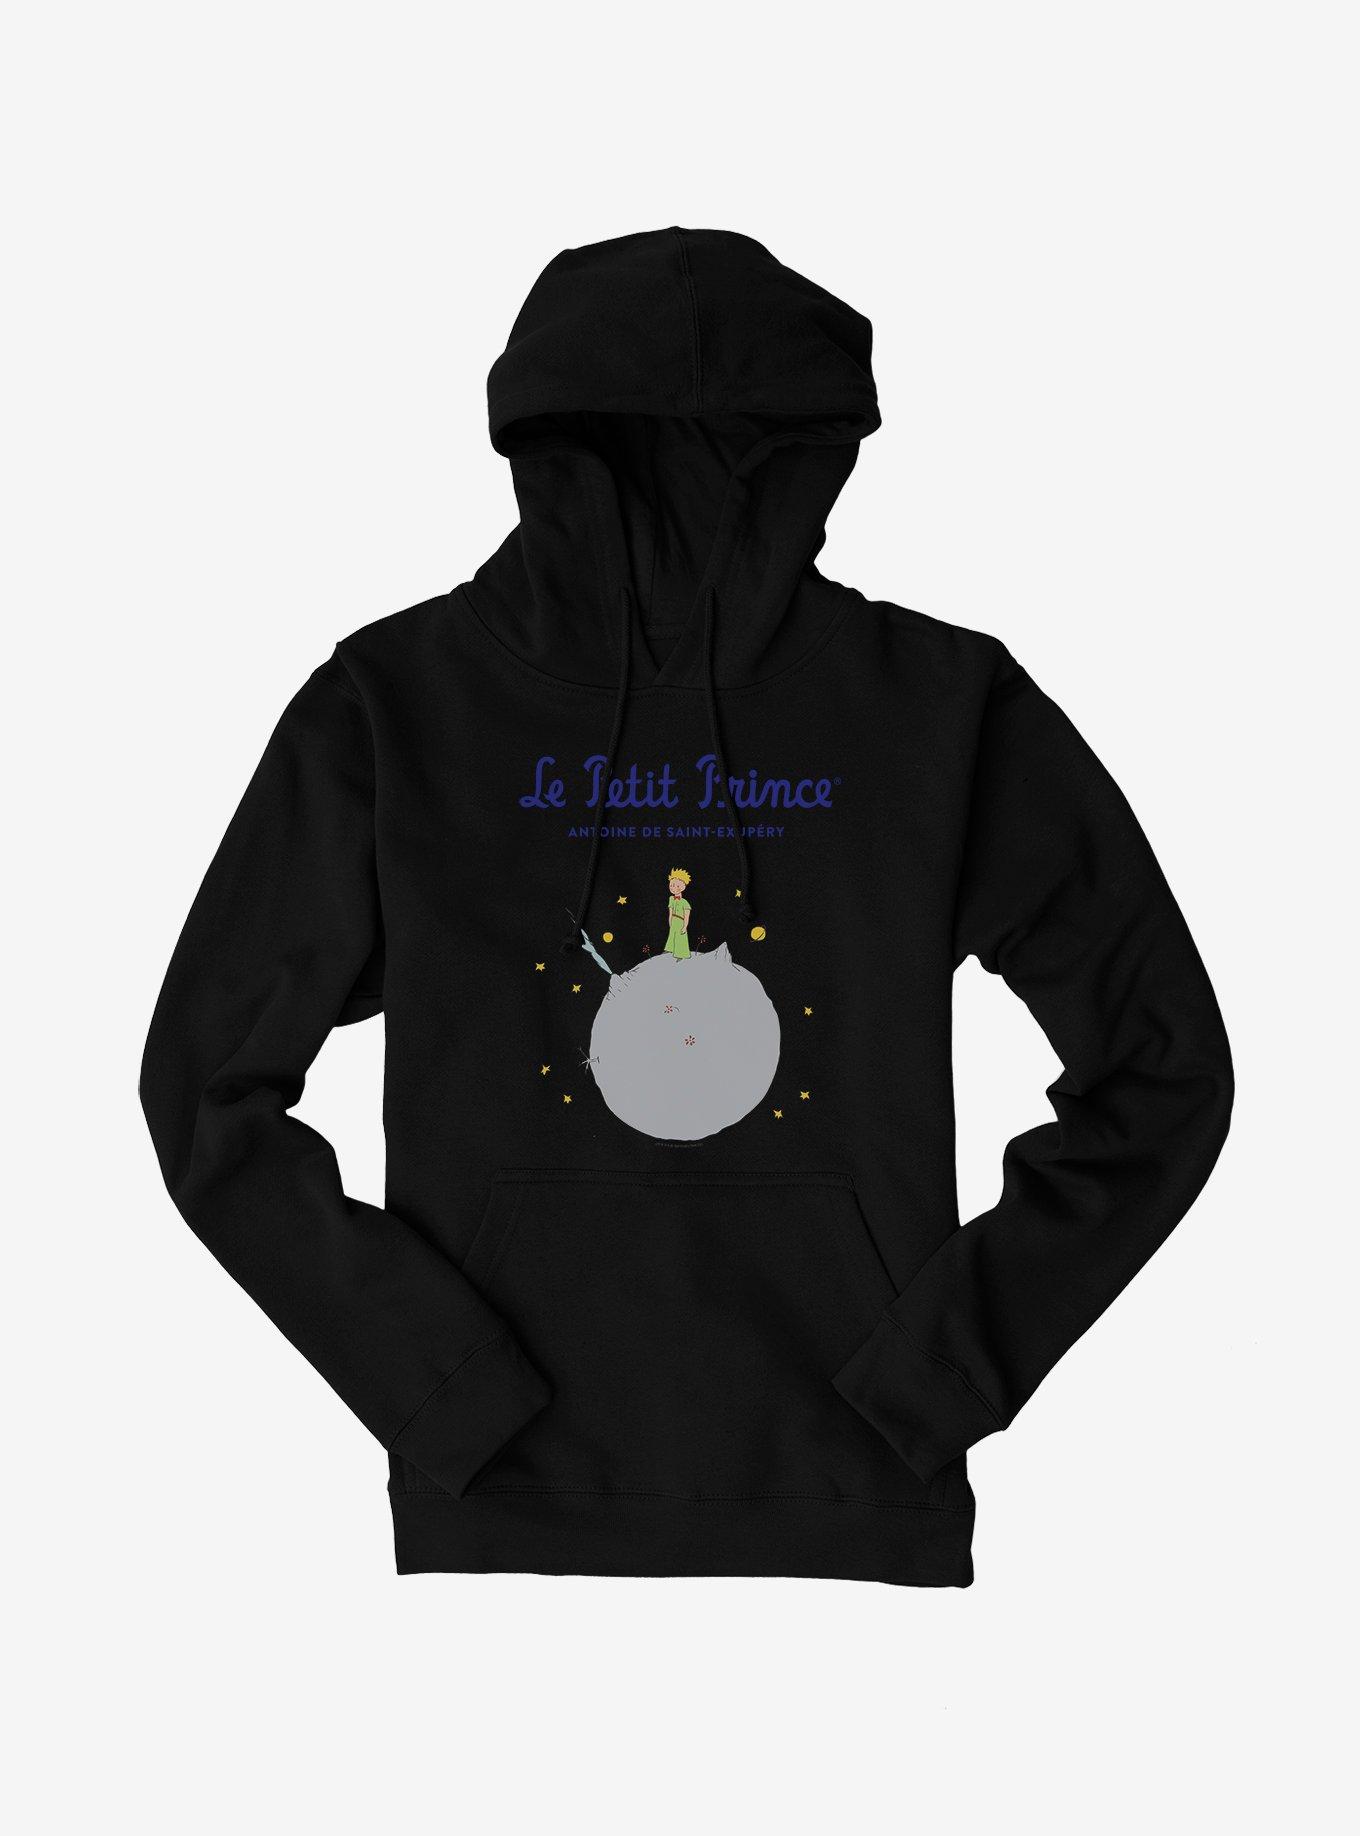 The Little Prince French Book Cover Hoodie